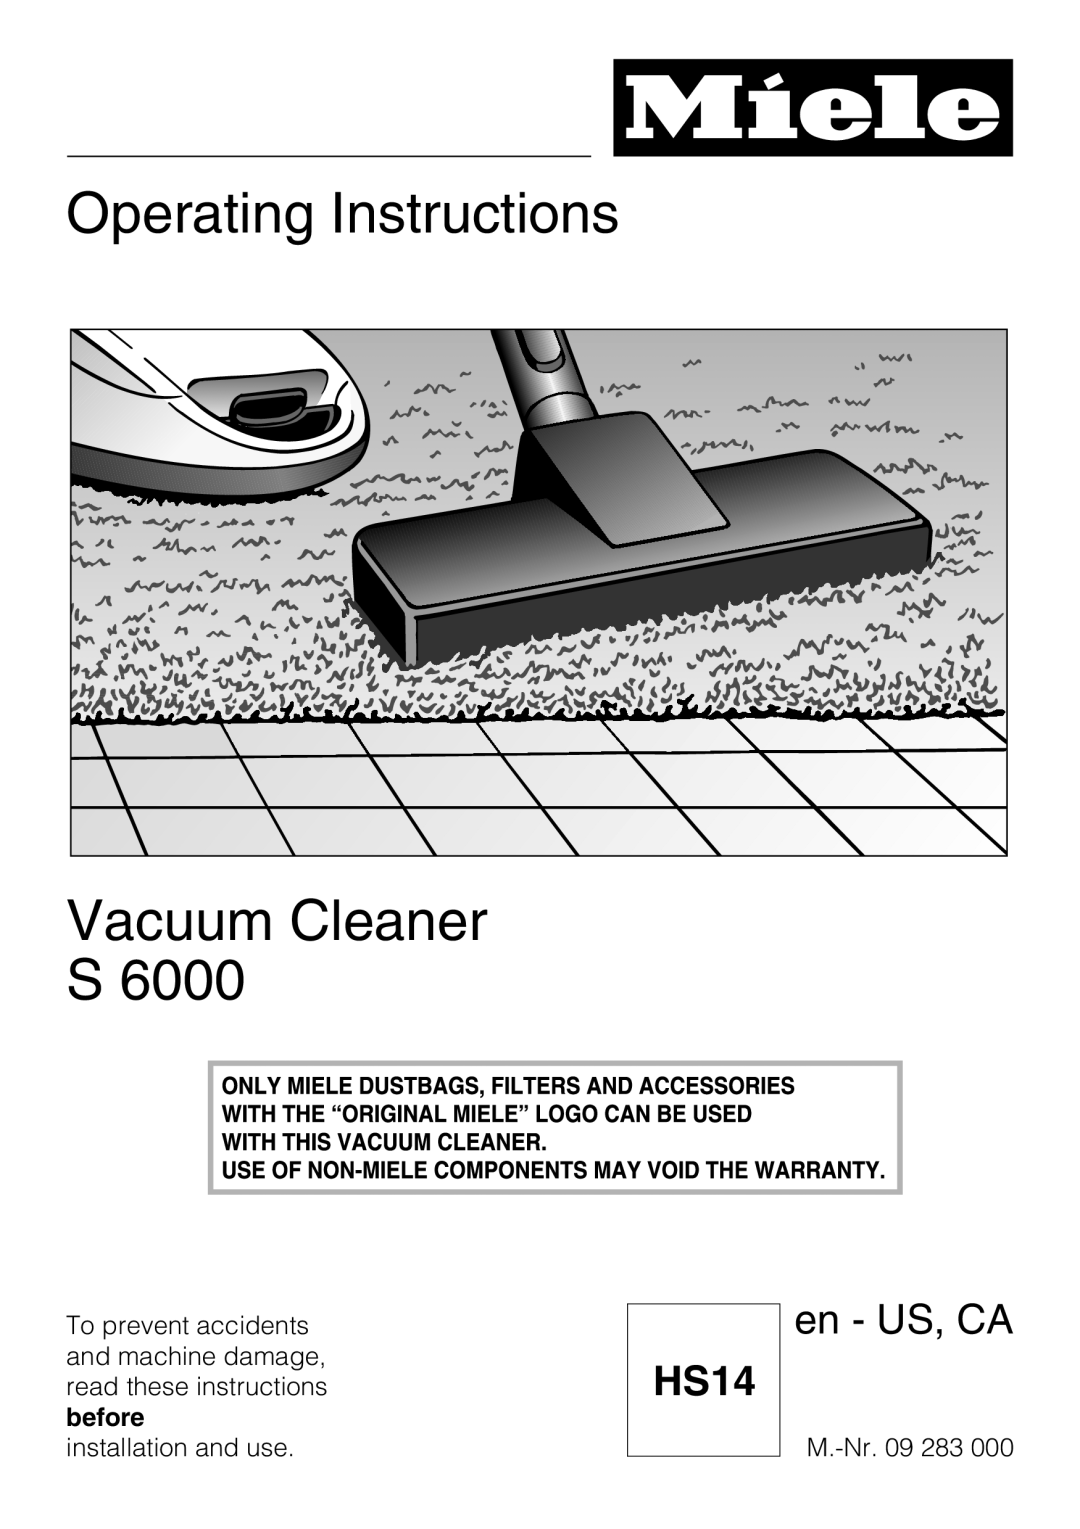 Miele S 6000 operating instructions Operating Instructions Vacuum Cleaner S, HS14, en - US, CA 